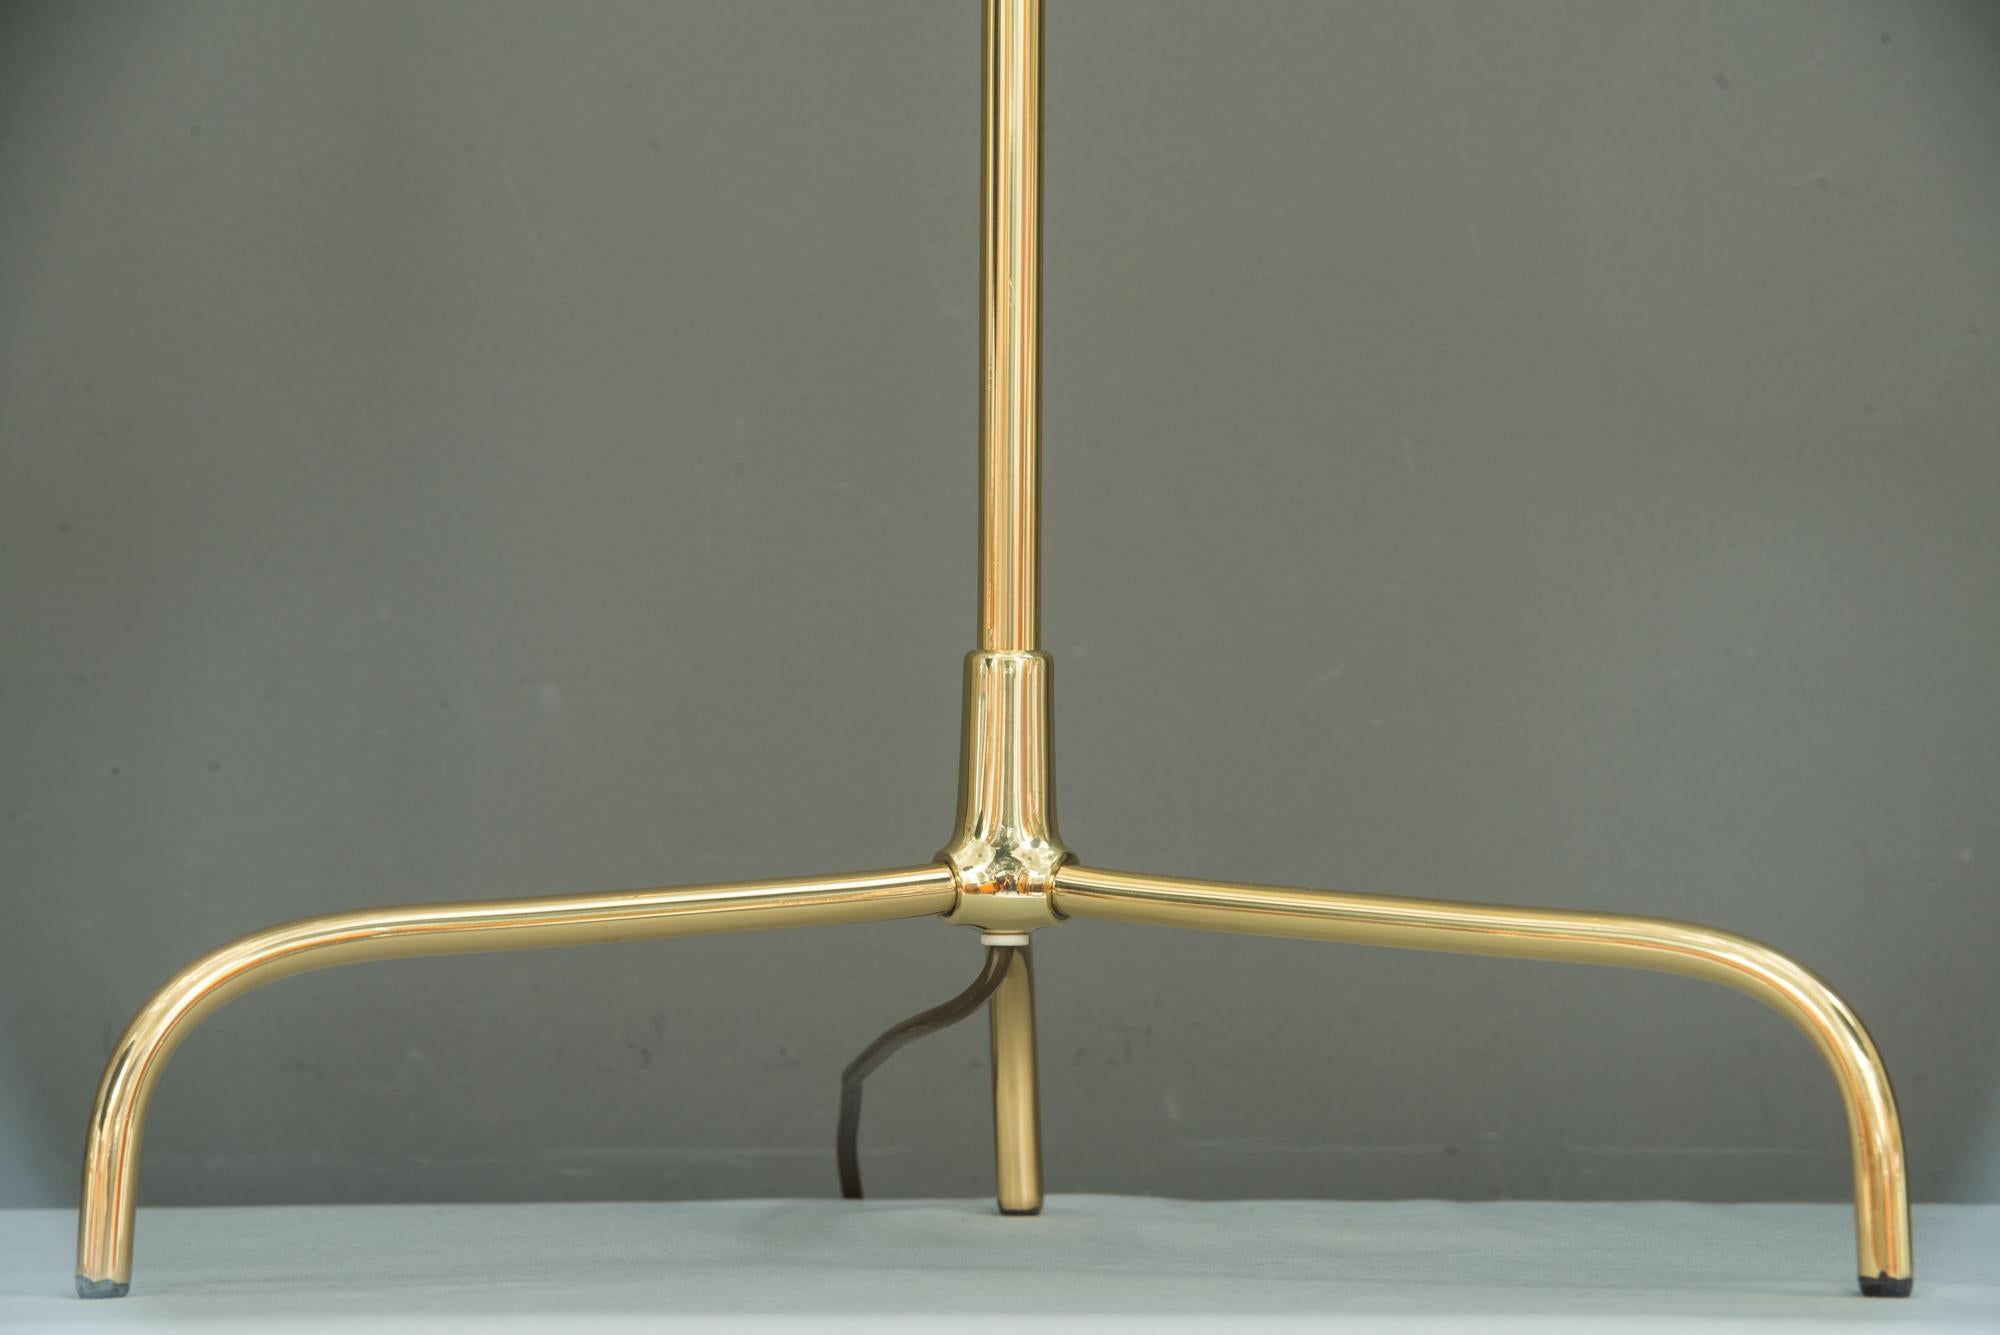 Two Rupert Nikoll Floor Lamps, circa 1950s In Good Condition For Sale In Wien, AT